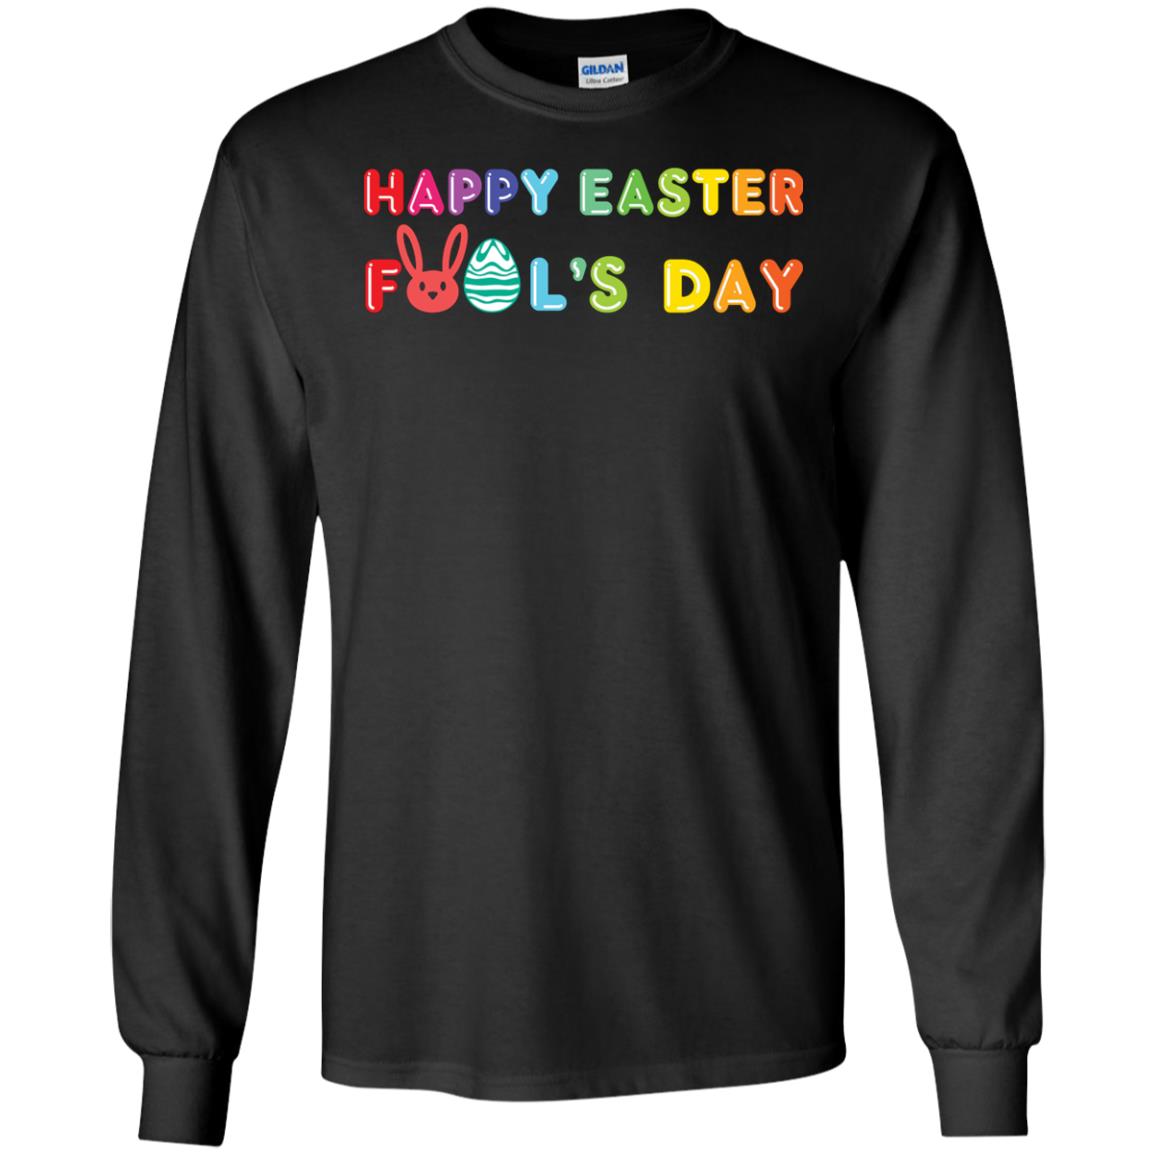 Happy Easter Fool’s Day T-shirt For Easter Holiday